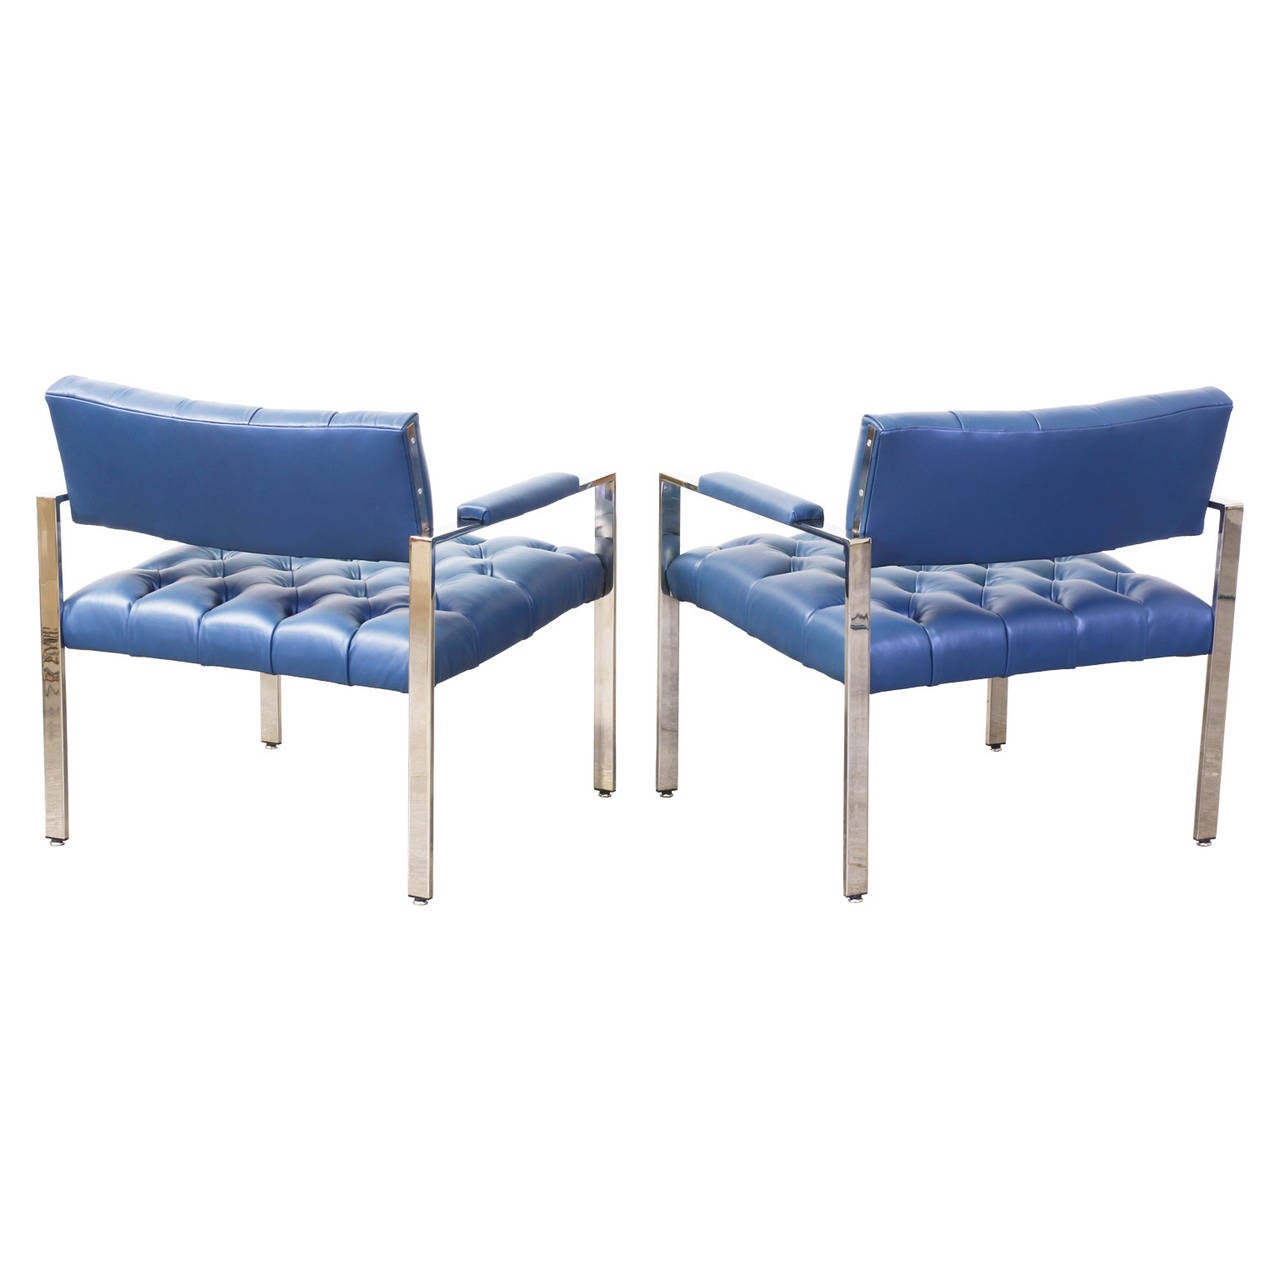 American Harvey Probber Chrome Leather Tufted Lounge Chairs